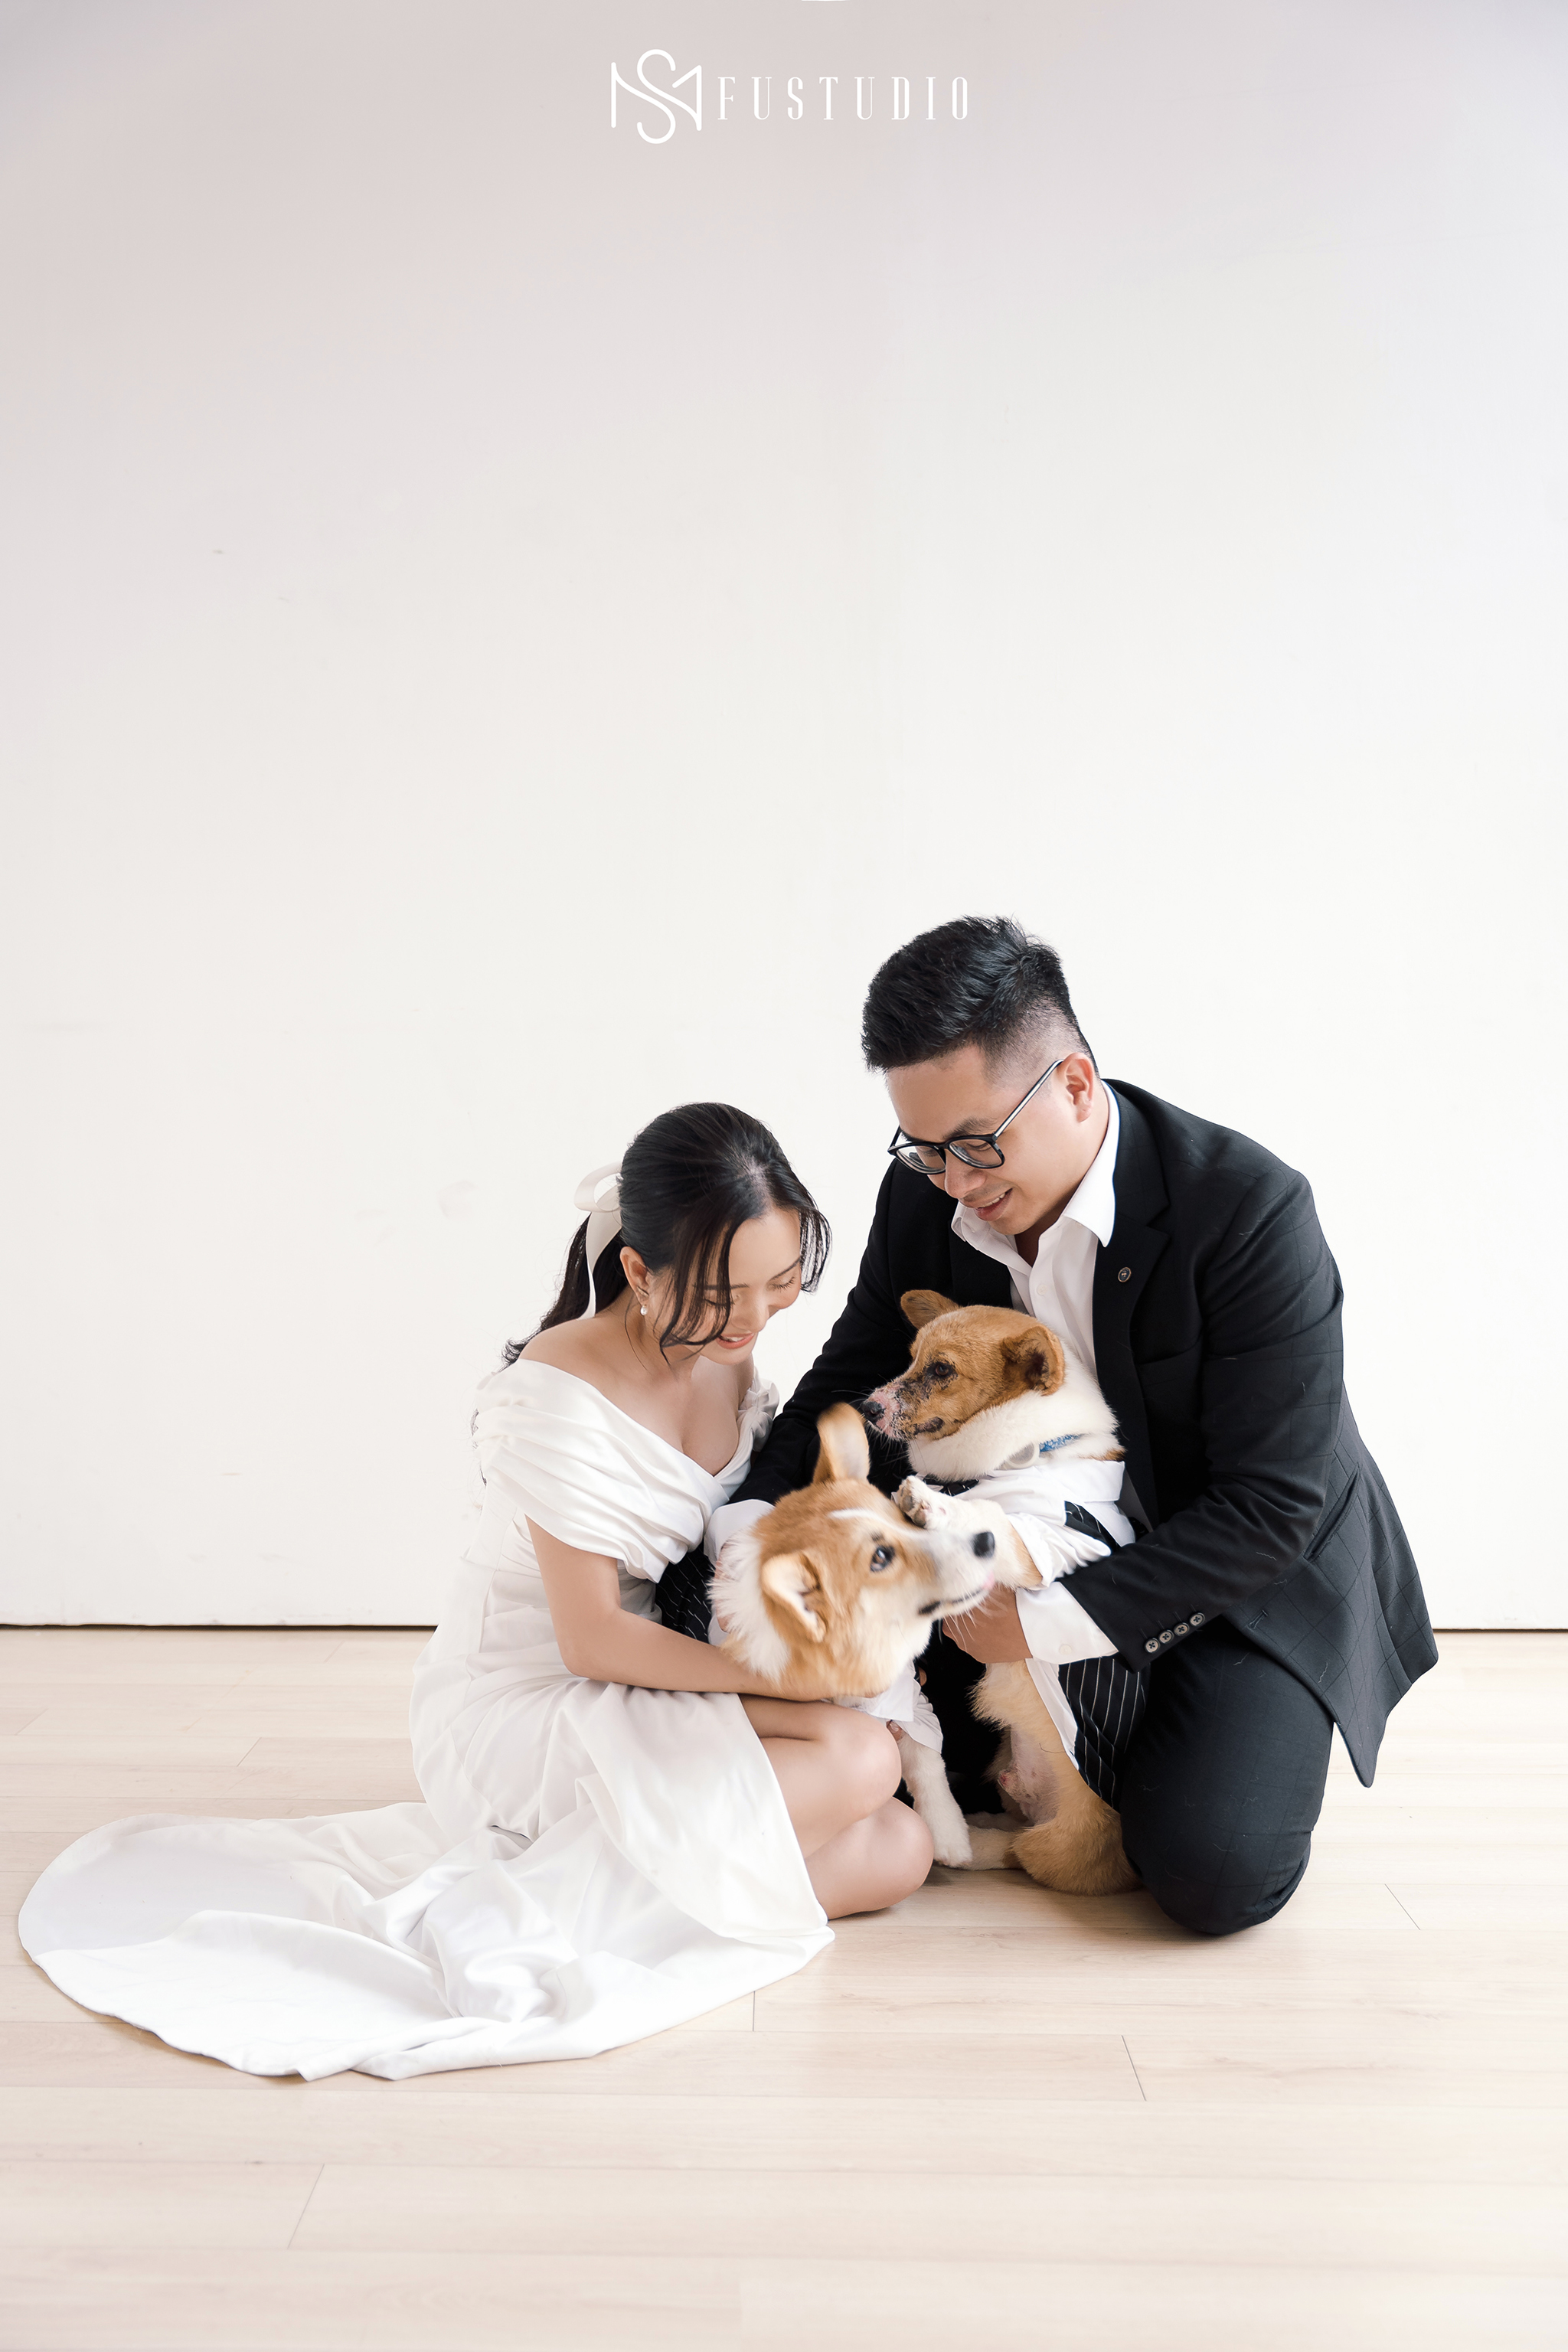 Letting the dog take a wedding photo together, the couple made netizens 